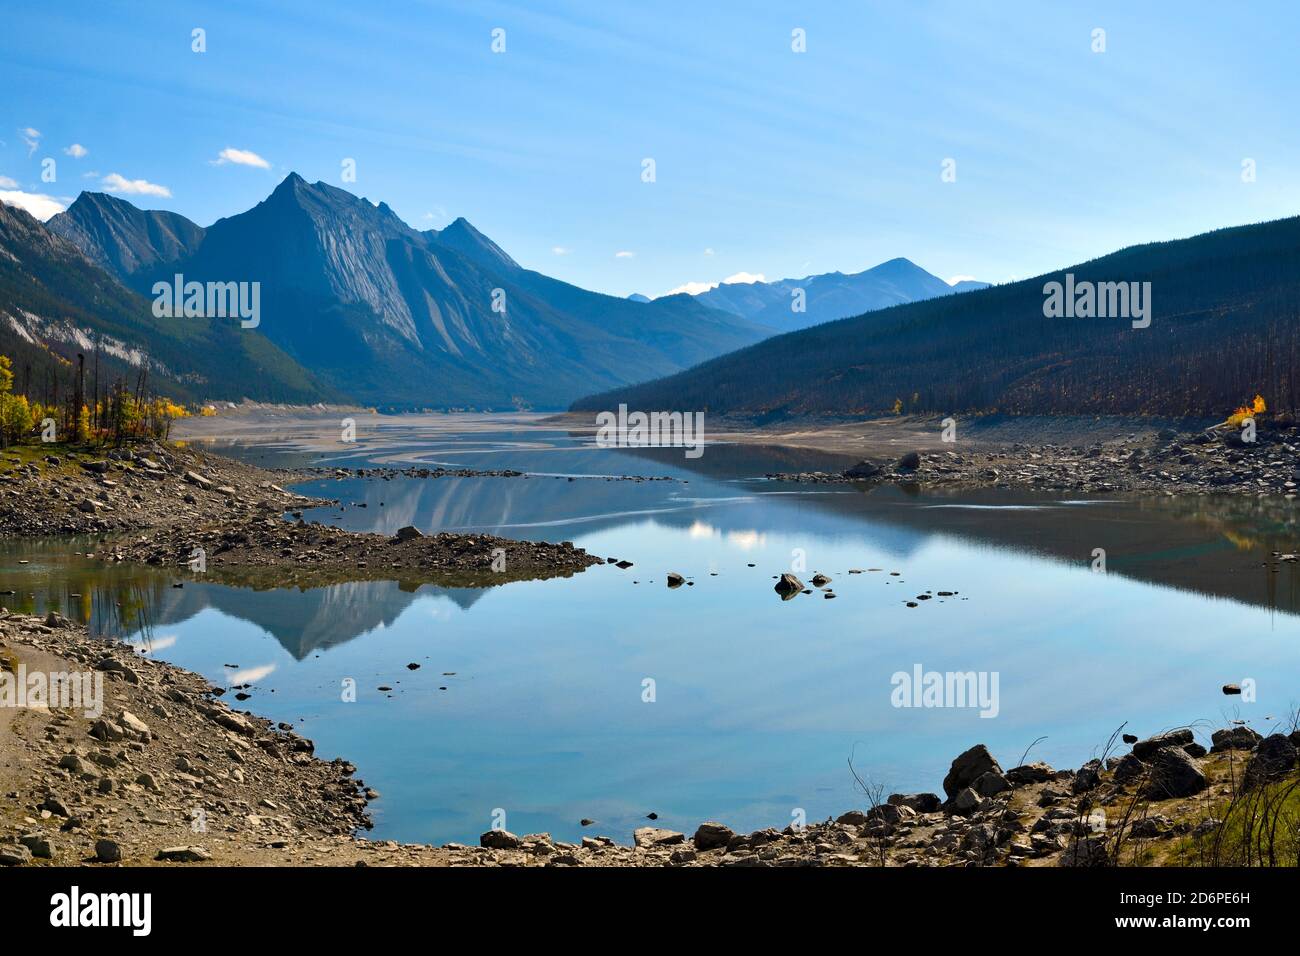 A landscape image of Medicine Lake on the Maligne lake road showing the low water in the lake with Annunciation Peak in the background in the famous J Stock Photo